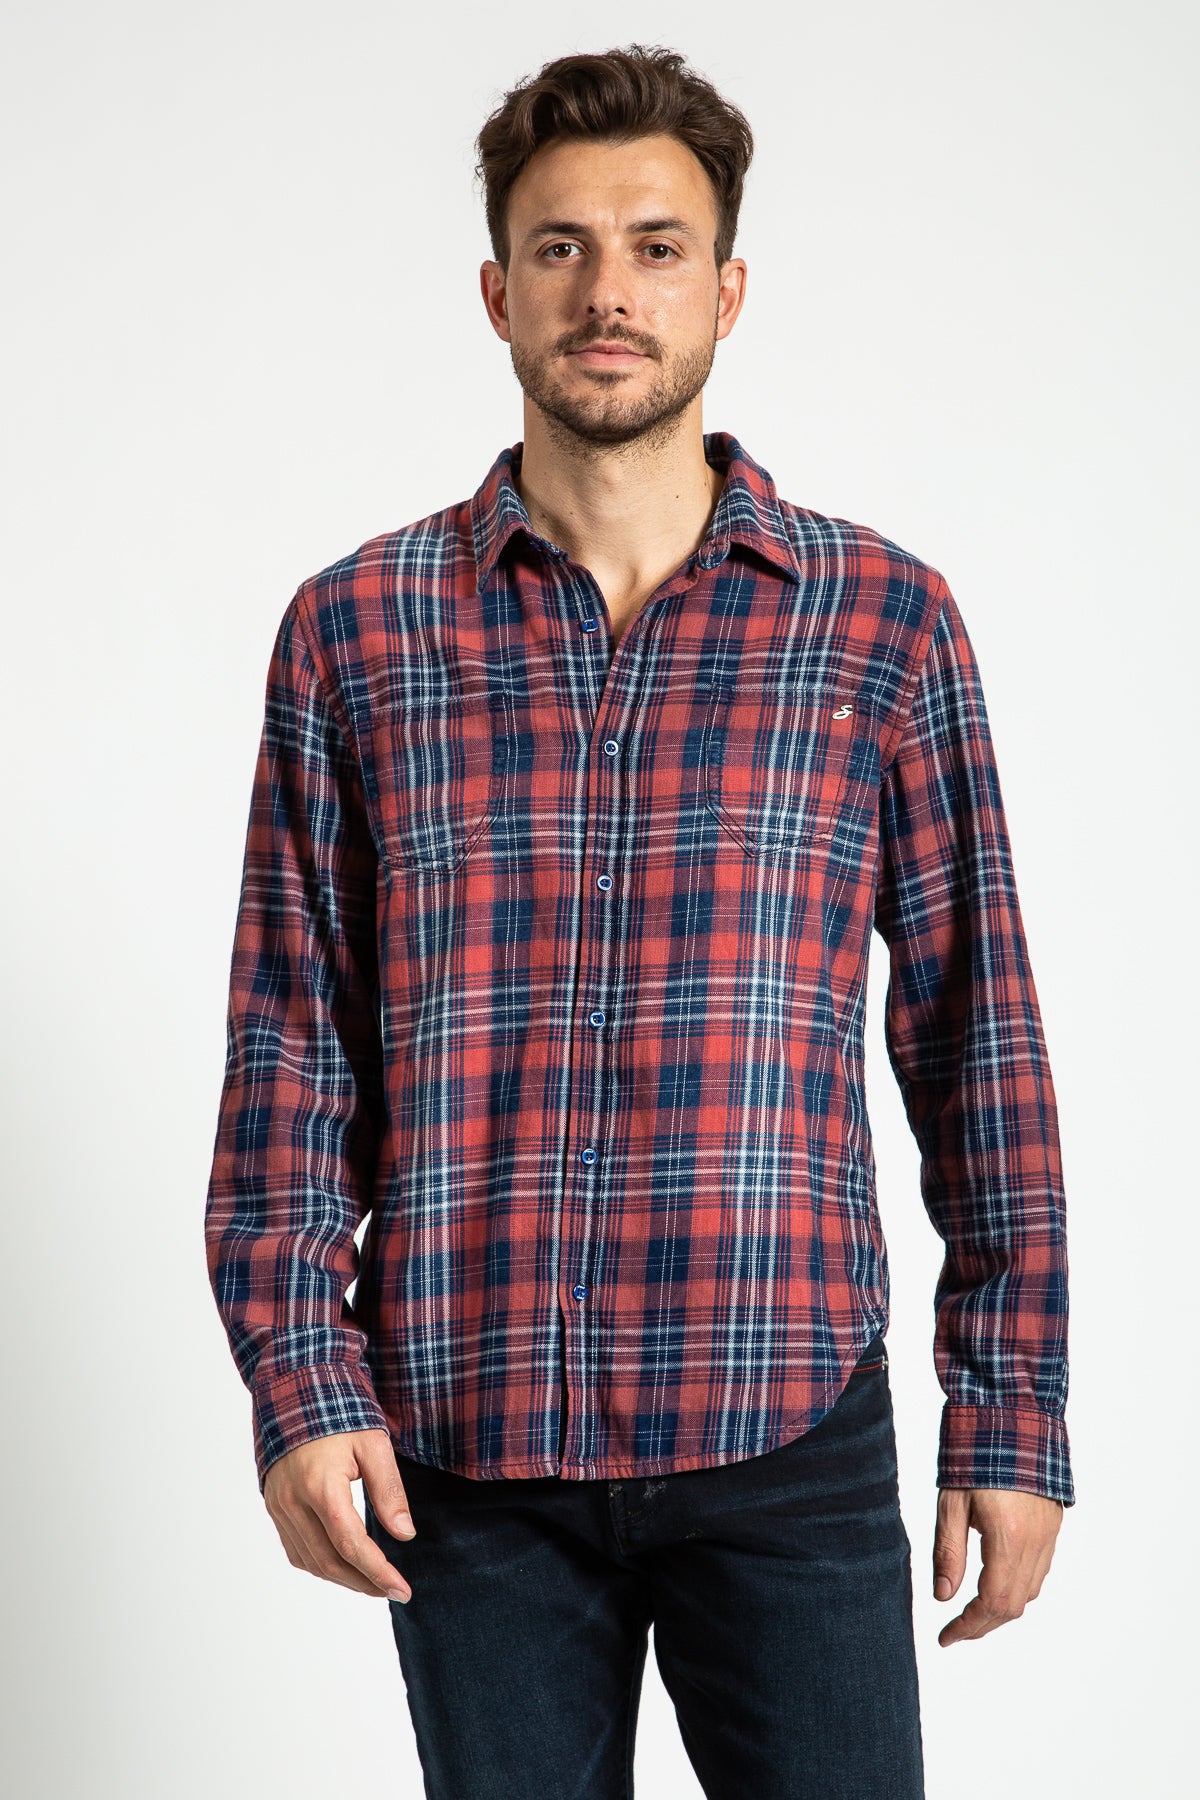 WOVEN PLAID SHIRT IN GLENDALE